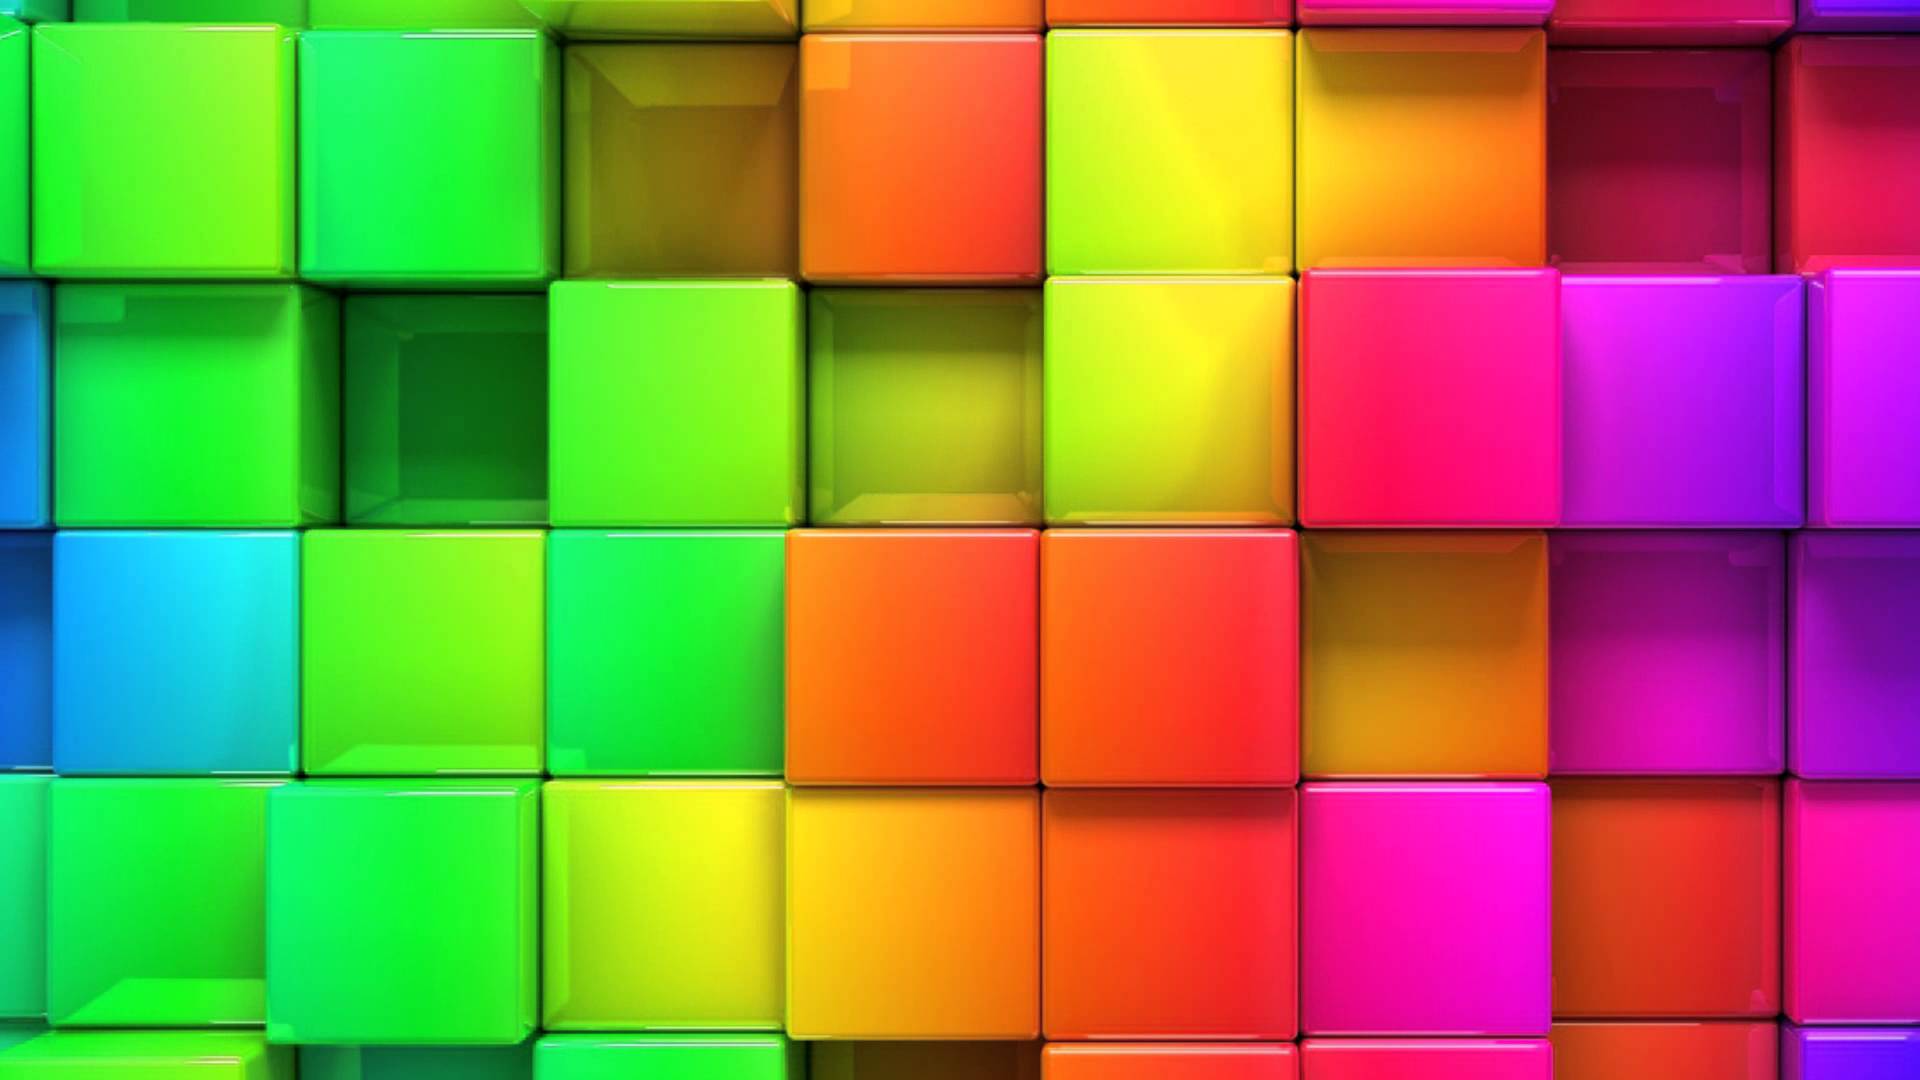 FREE BACKGROUND GRAPHICS - COLORFUL SQUARES BLOCKS - YouTube